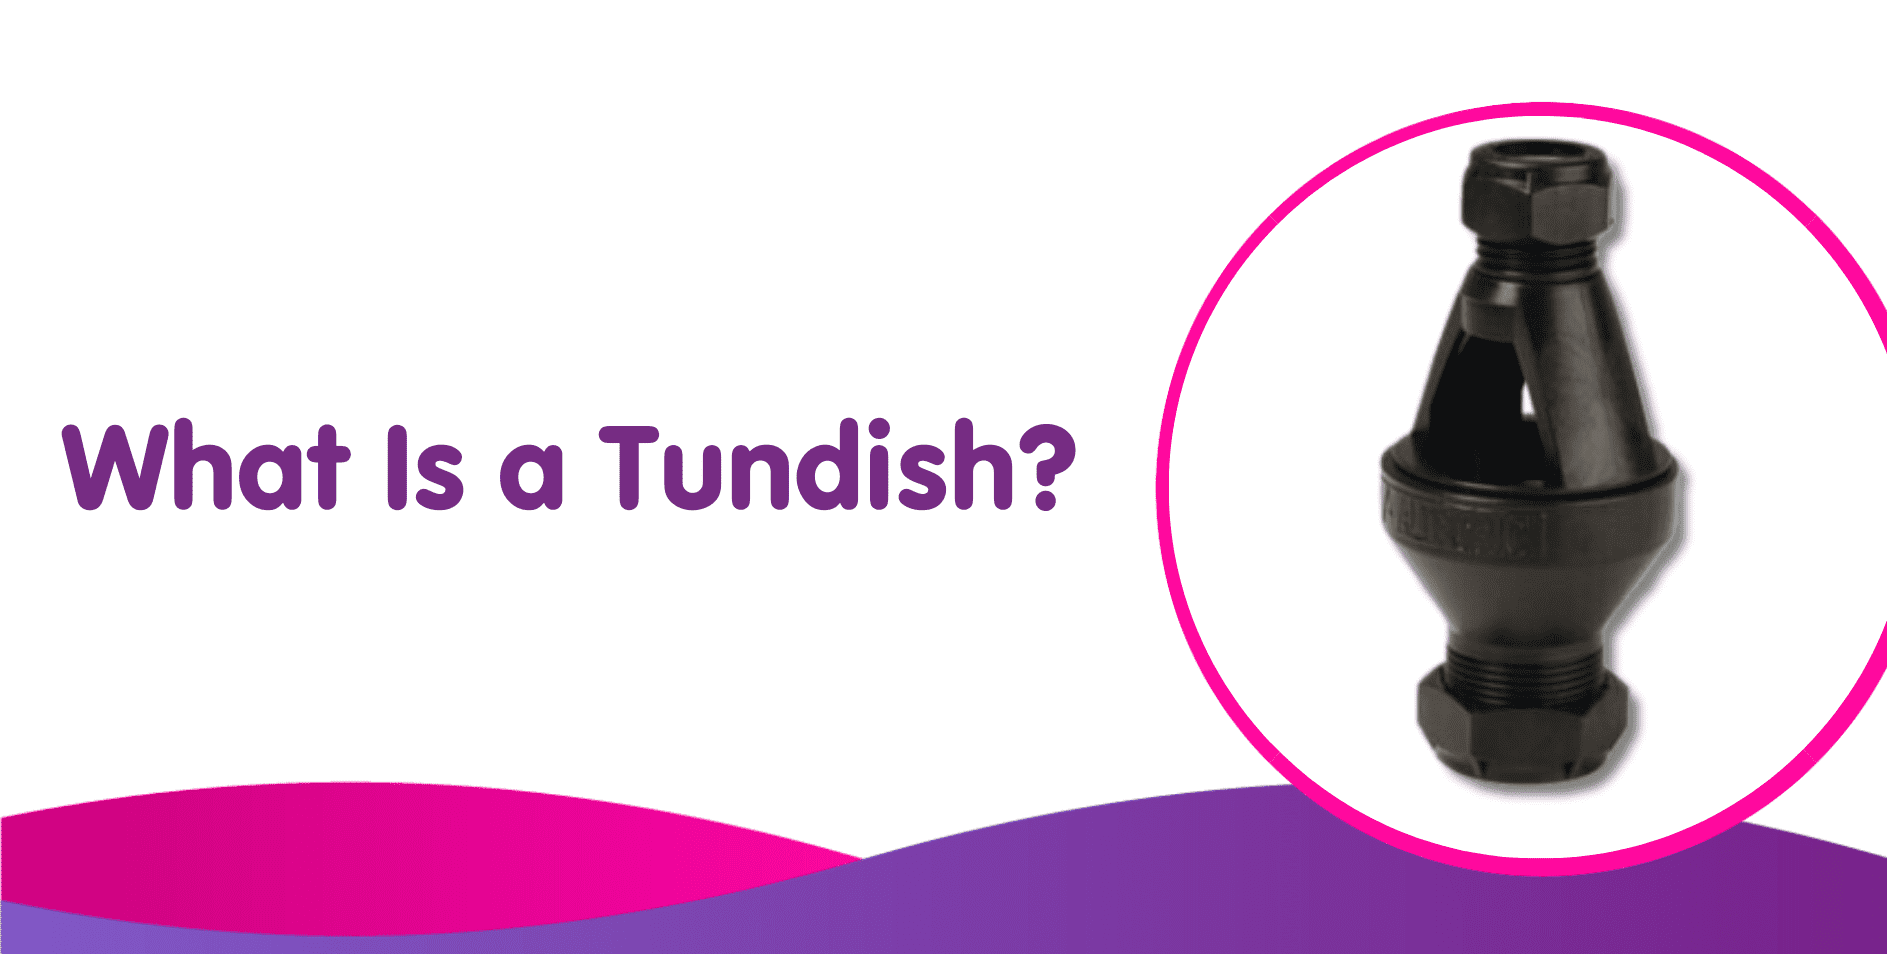 What Is a Tundish?